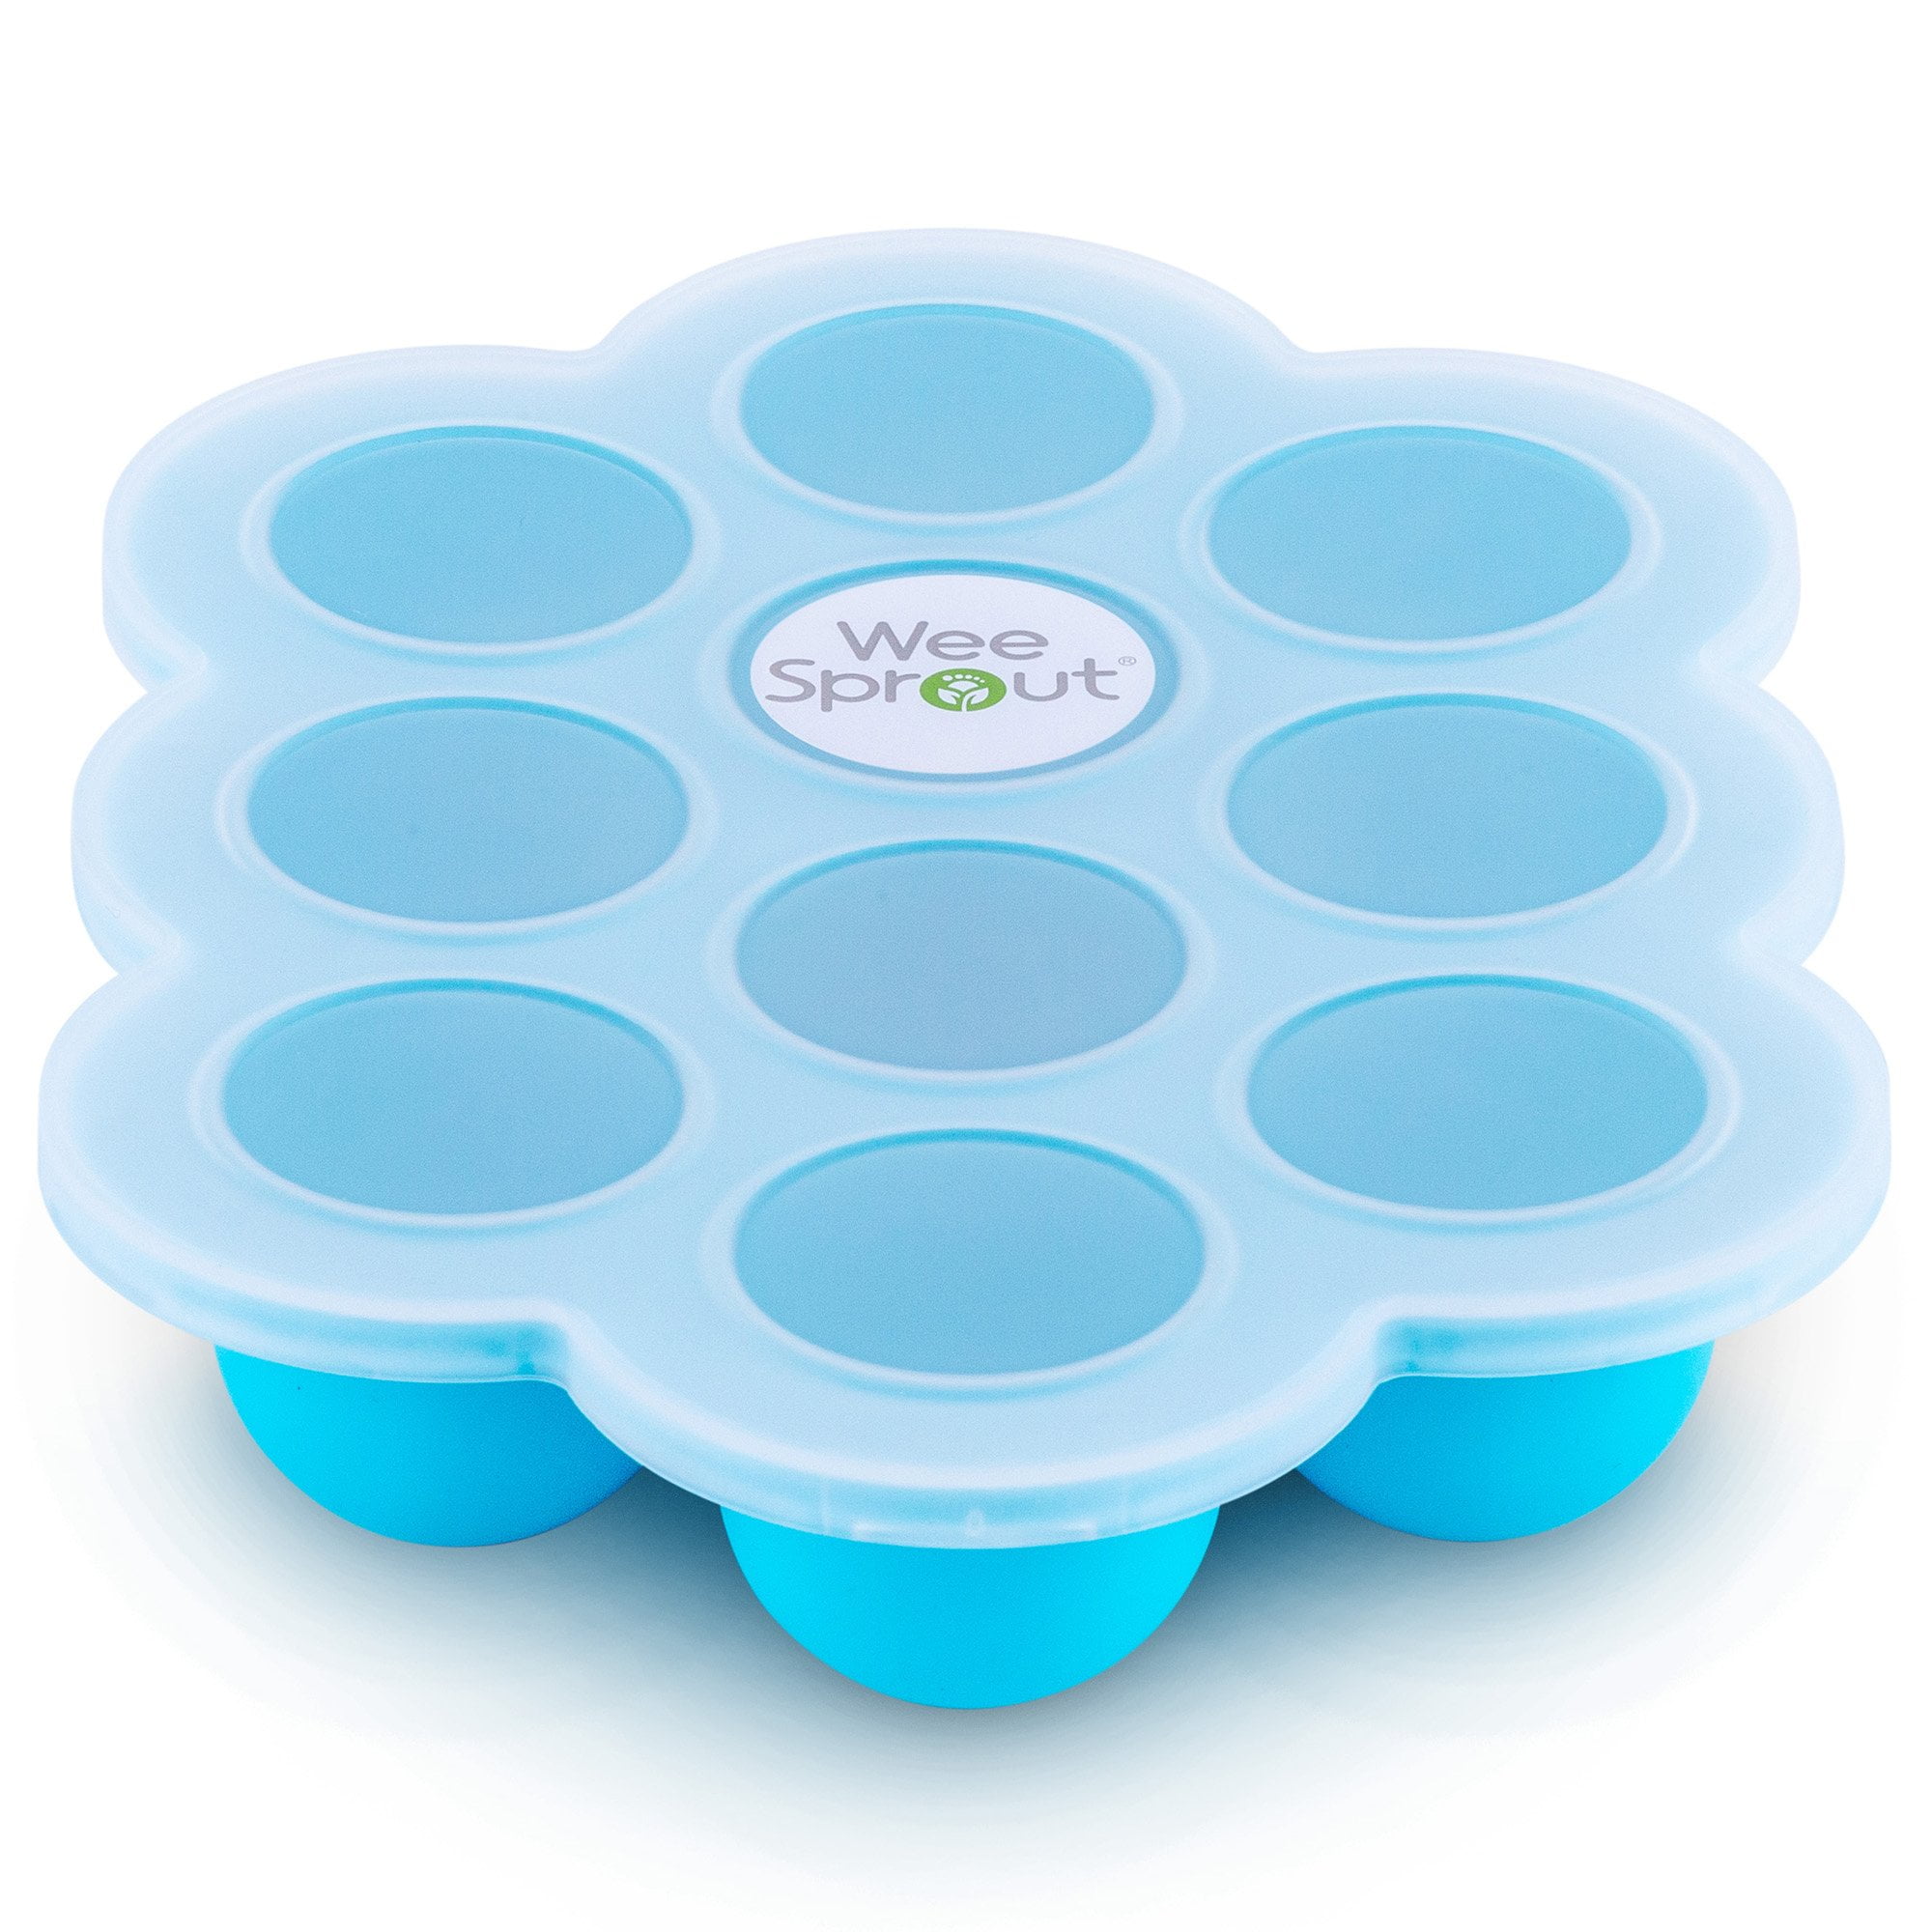 Baby Food Freezer Tray – Clear - otterlove by Platinum Pure